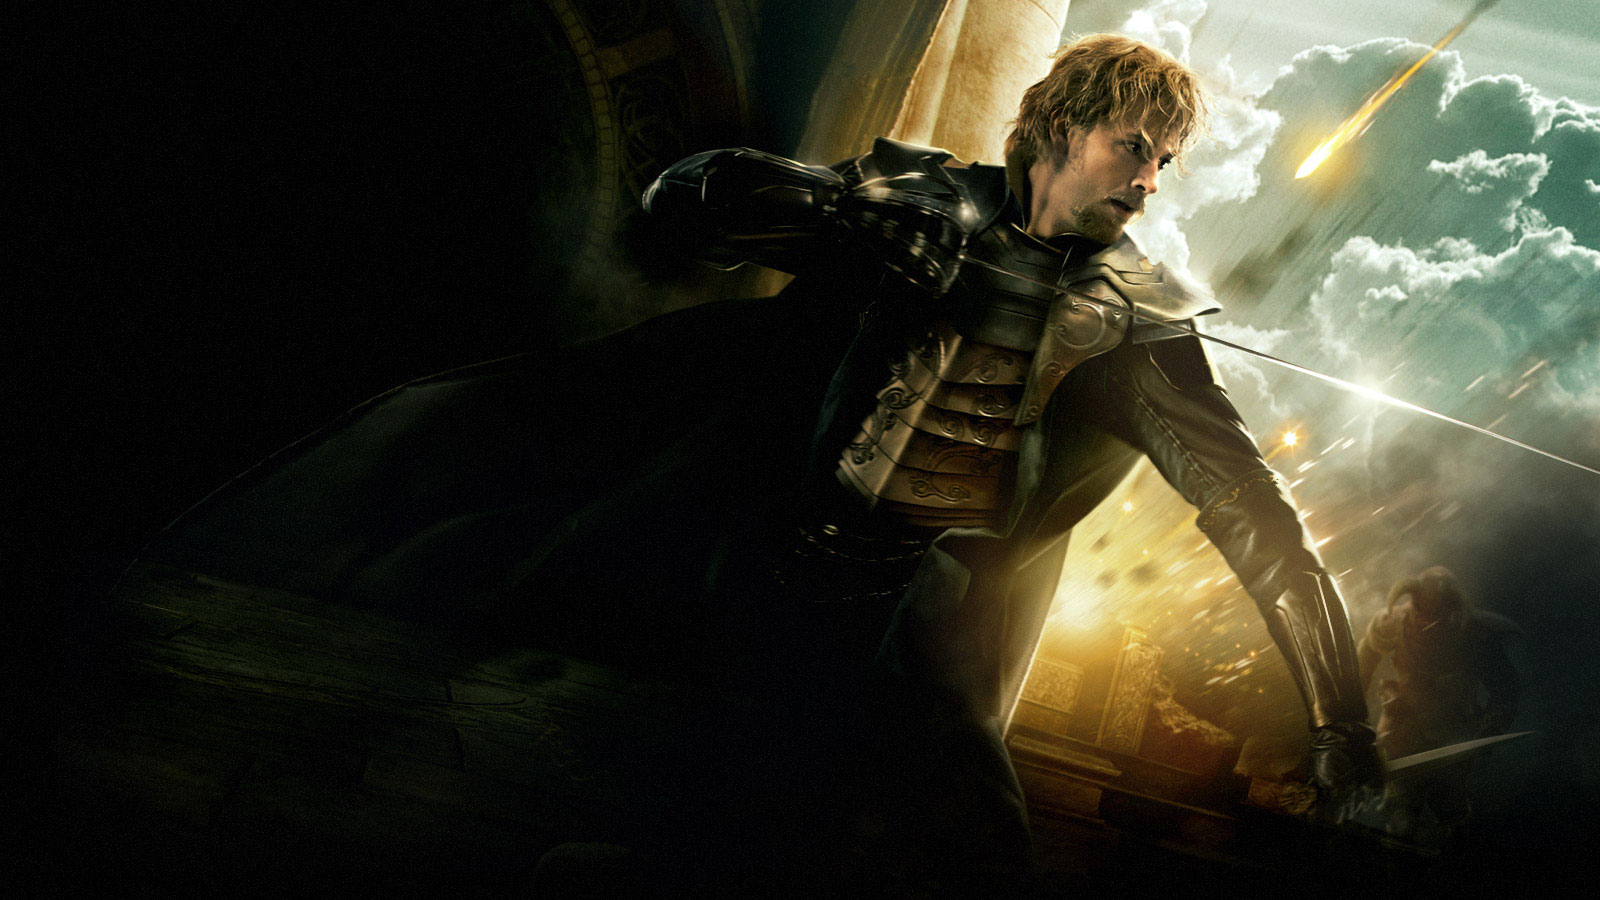 Thor 2 The Dark World 2013 Movie Wallpapers HD & Facebook Covers